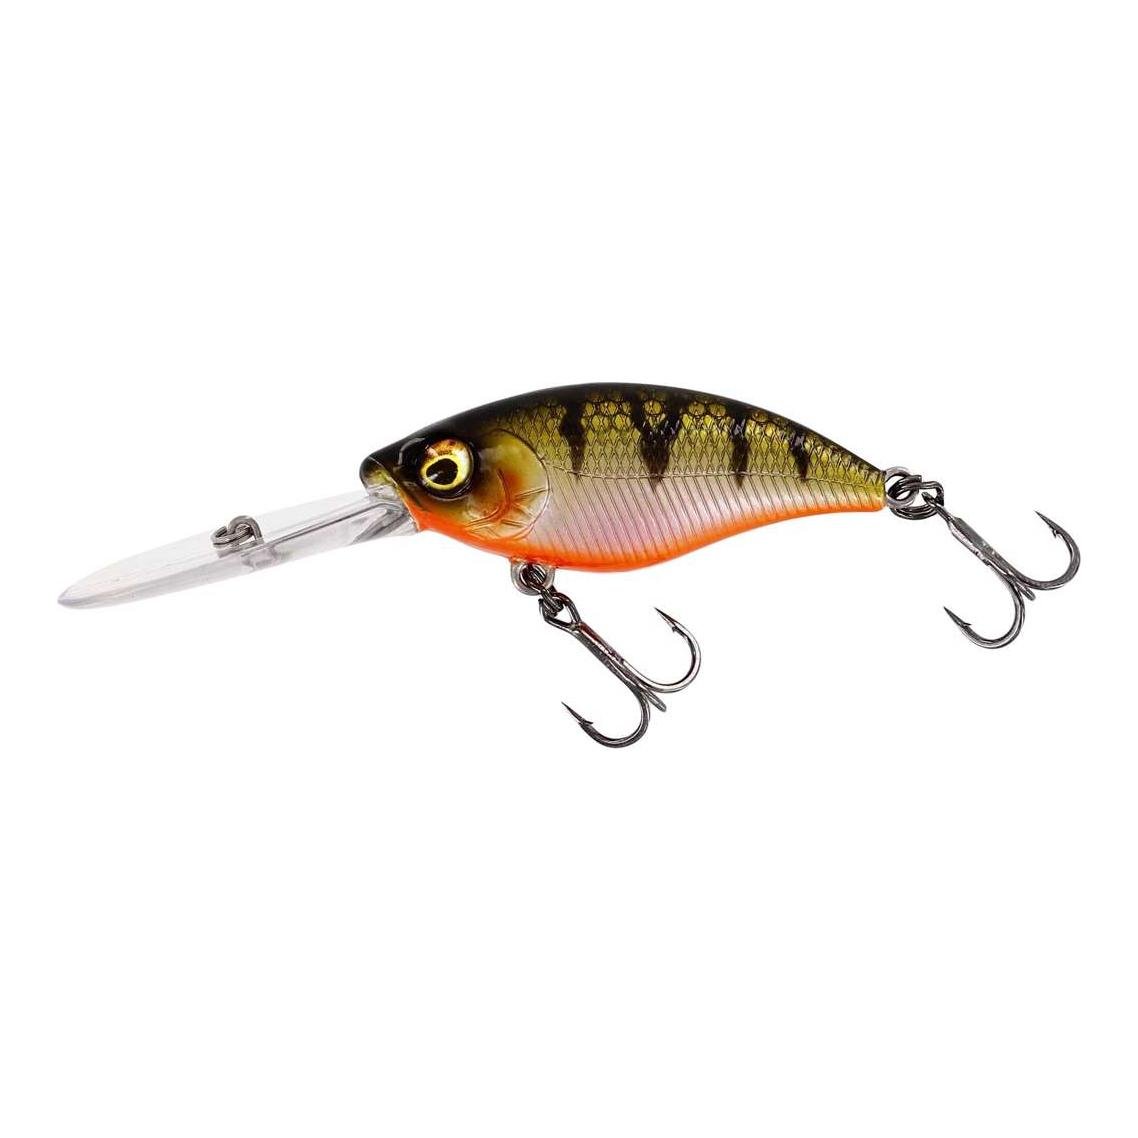 Fishing with surface crankbait - Salmo Lil'Bug 